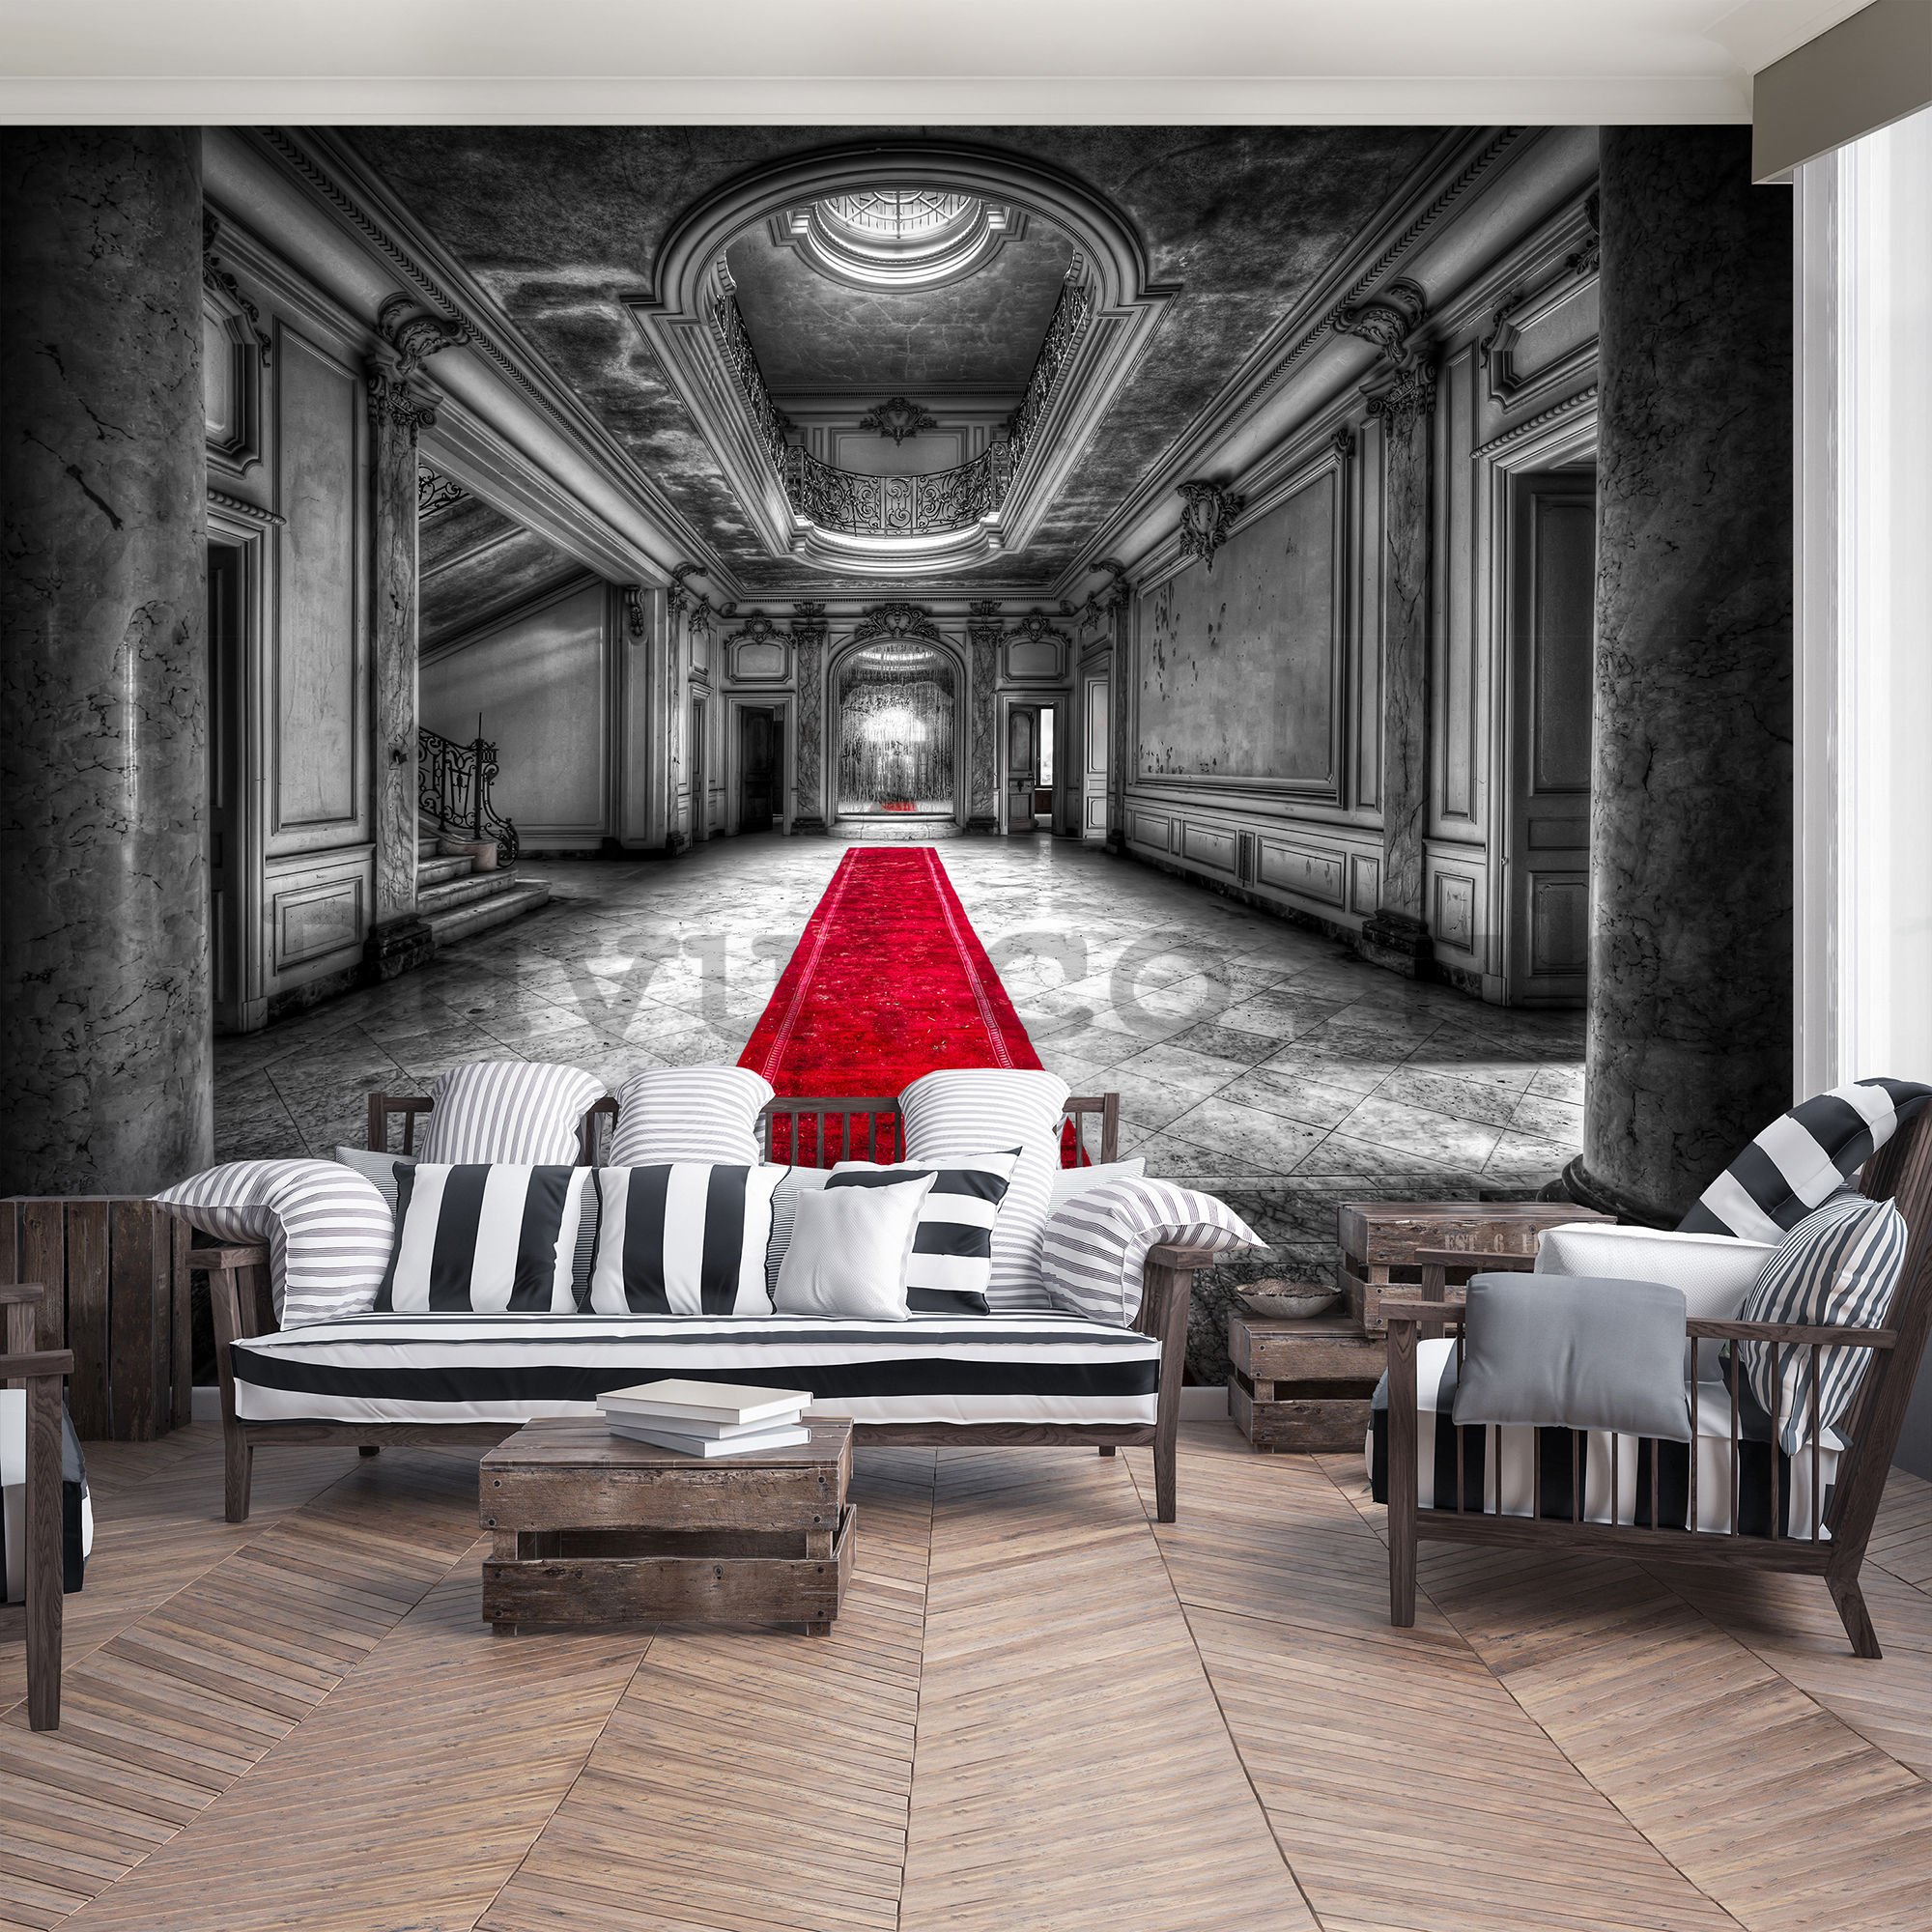 Wall mural vlies: Hallway at the castle - 254x368 cm